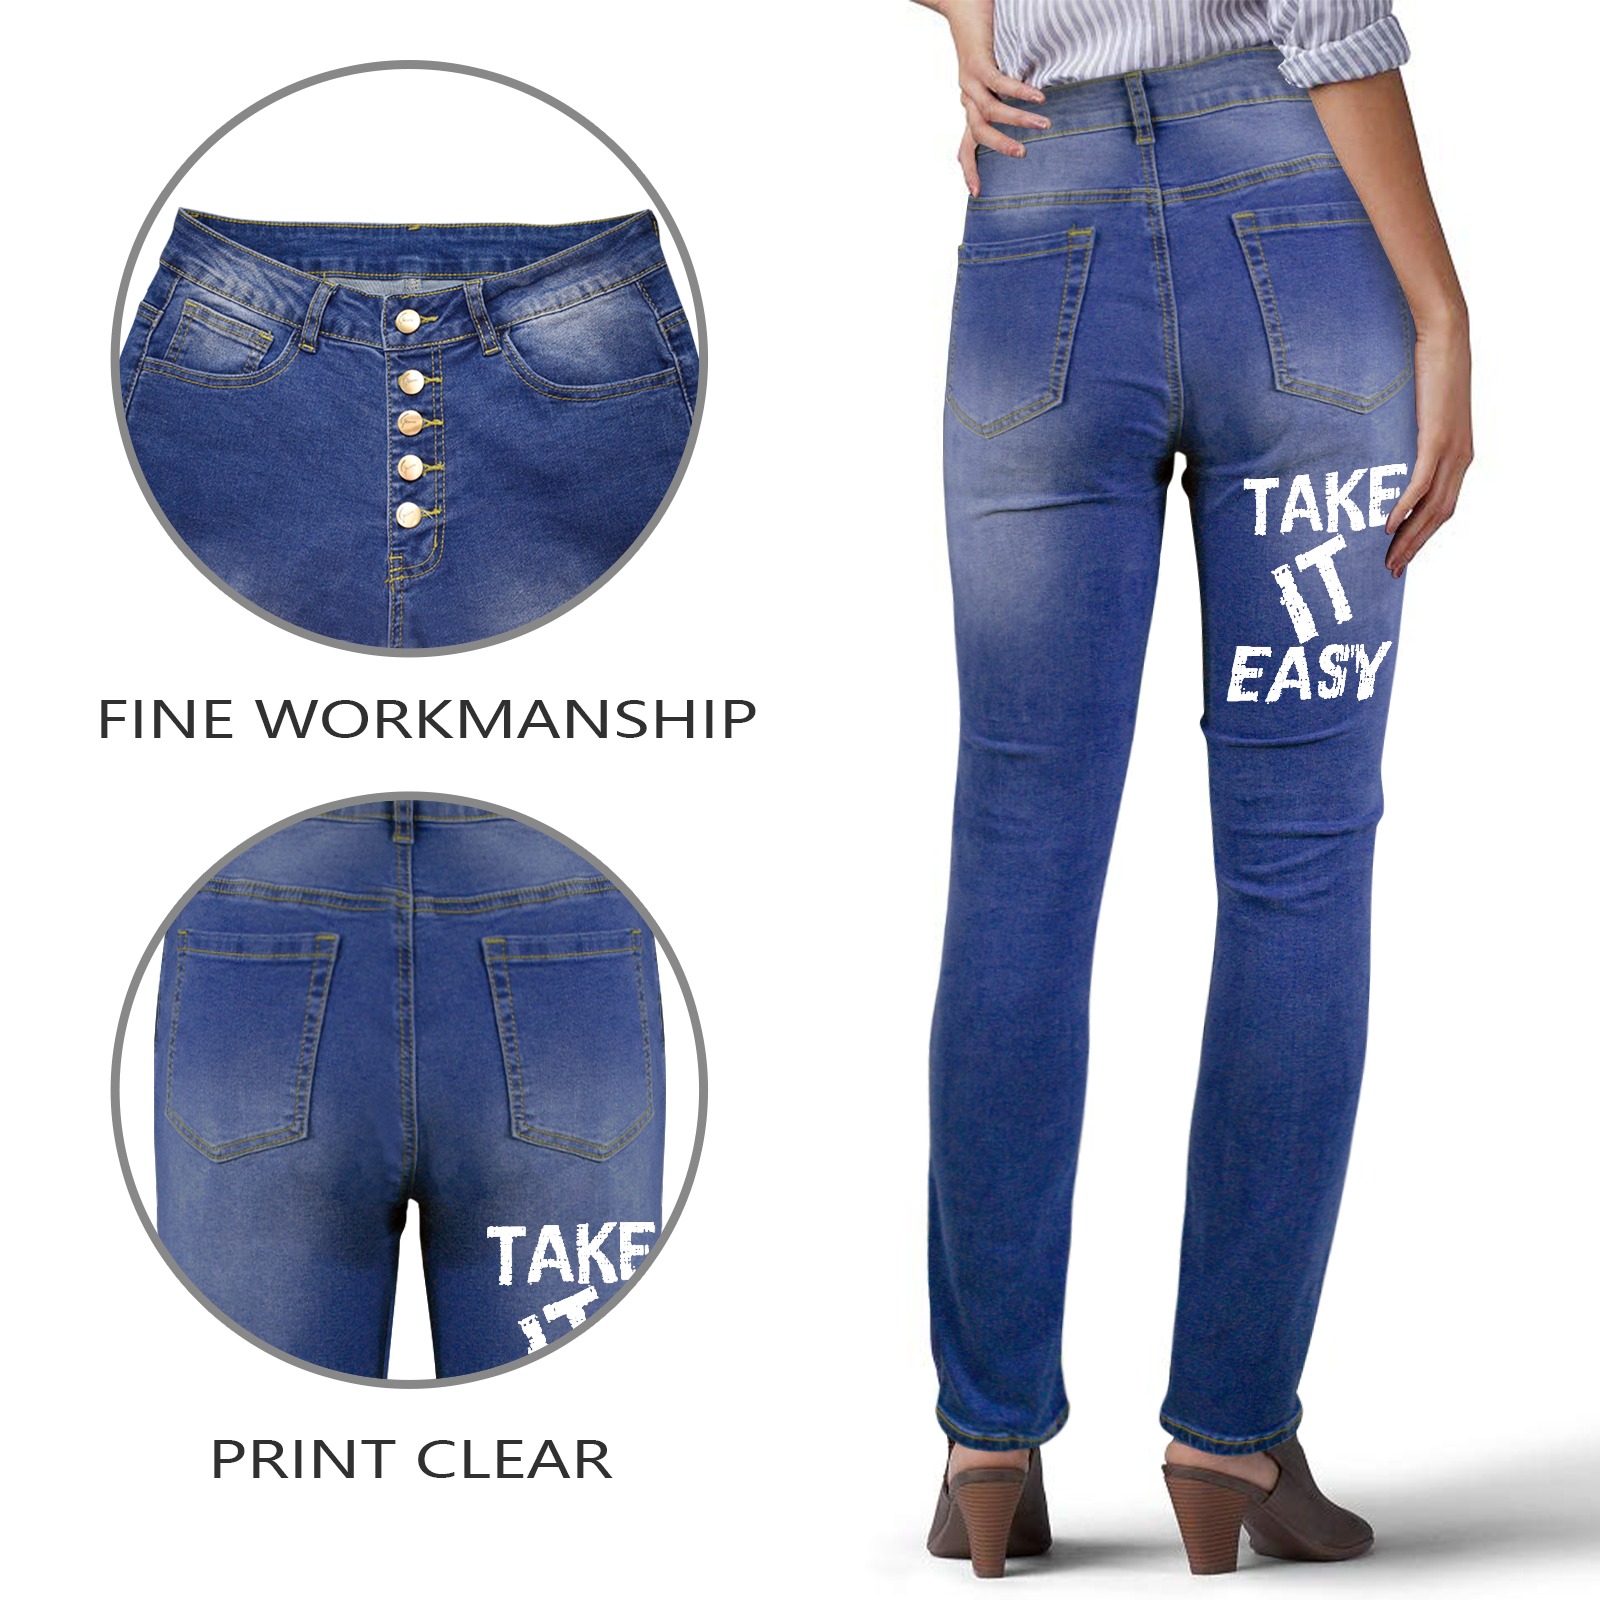 Take it easy charming white text, typography art. Women's Jeans (Back Printing)